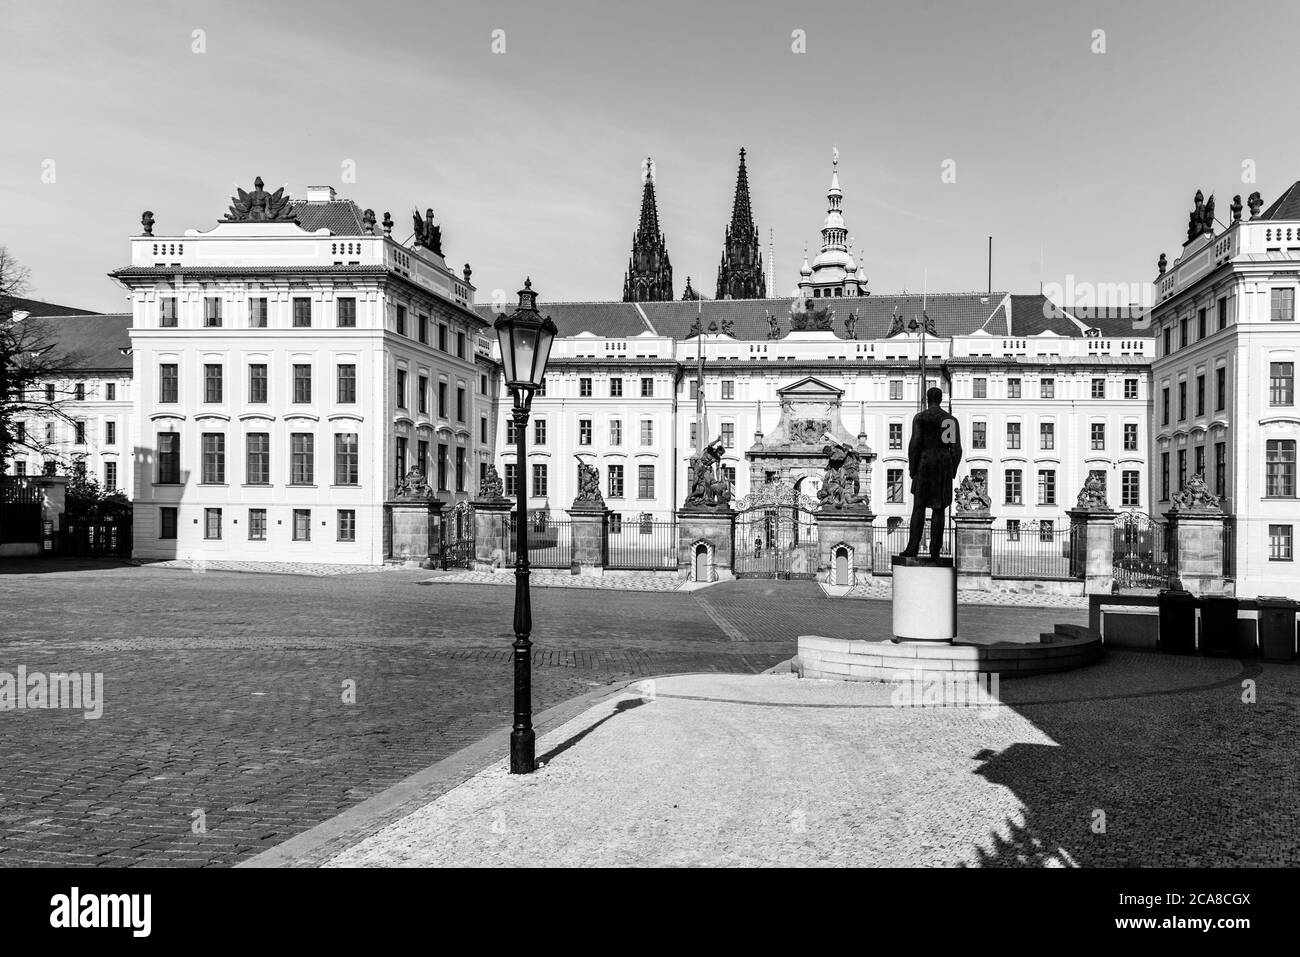 Hradcany square with entrance gate to Prague Castle and statue of Tomas Garrigue Masaryk - the first President of Czechoslovakia, Praha, Czech Republic. Black and white image. Stock Photo